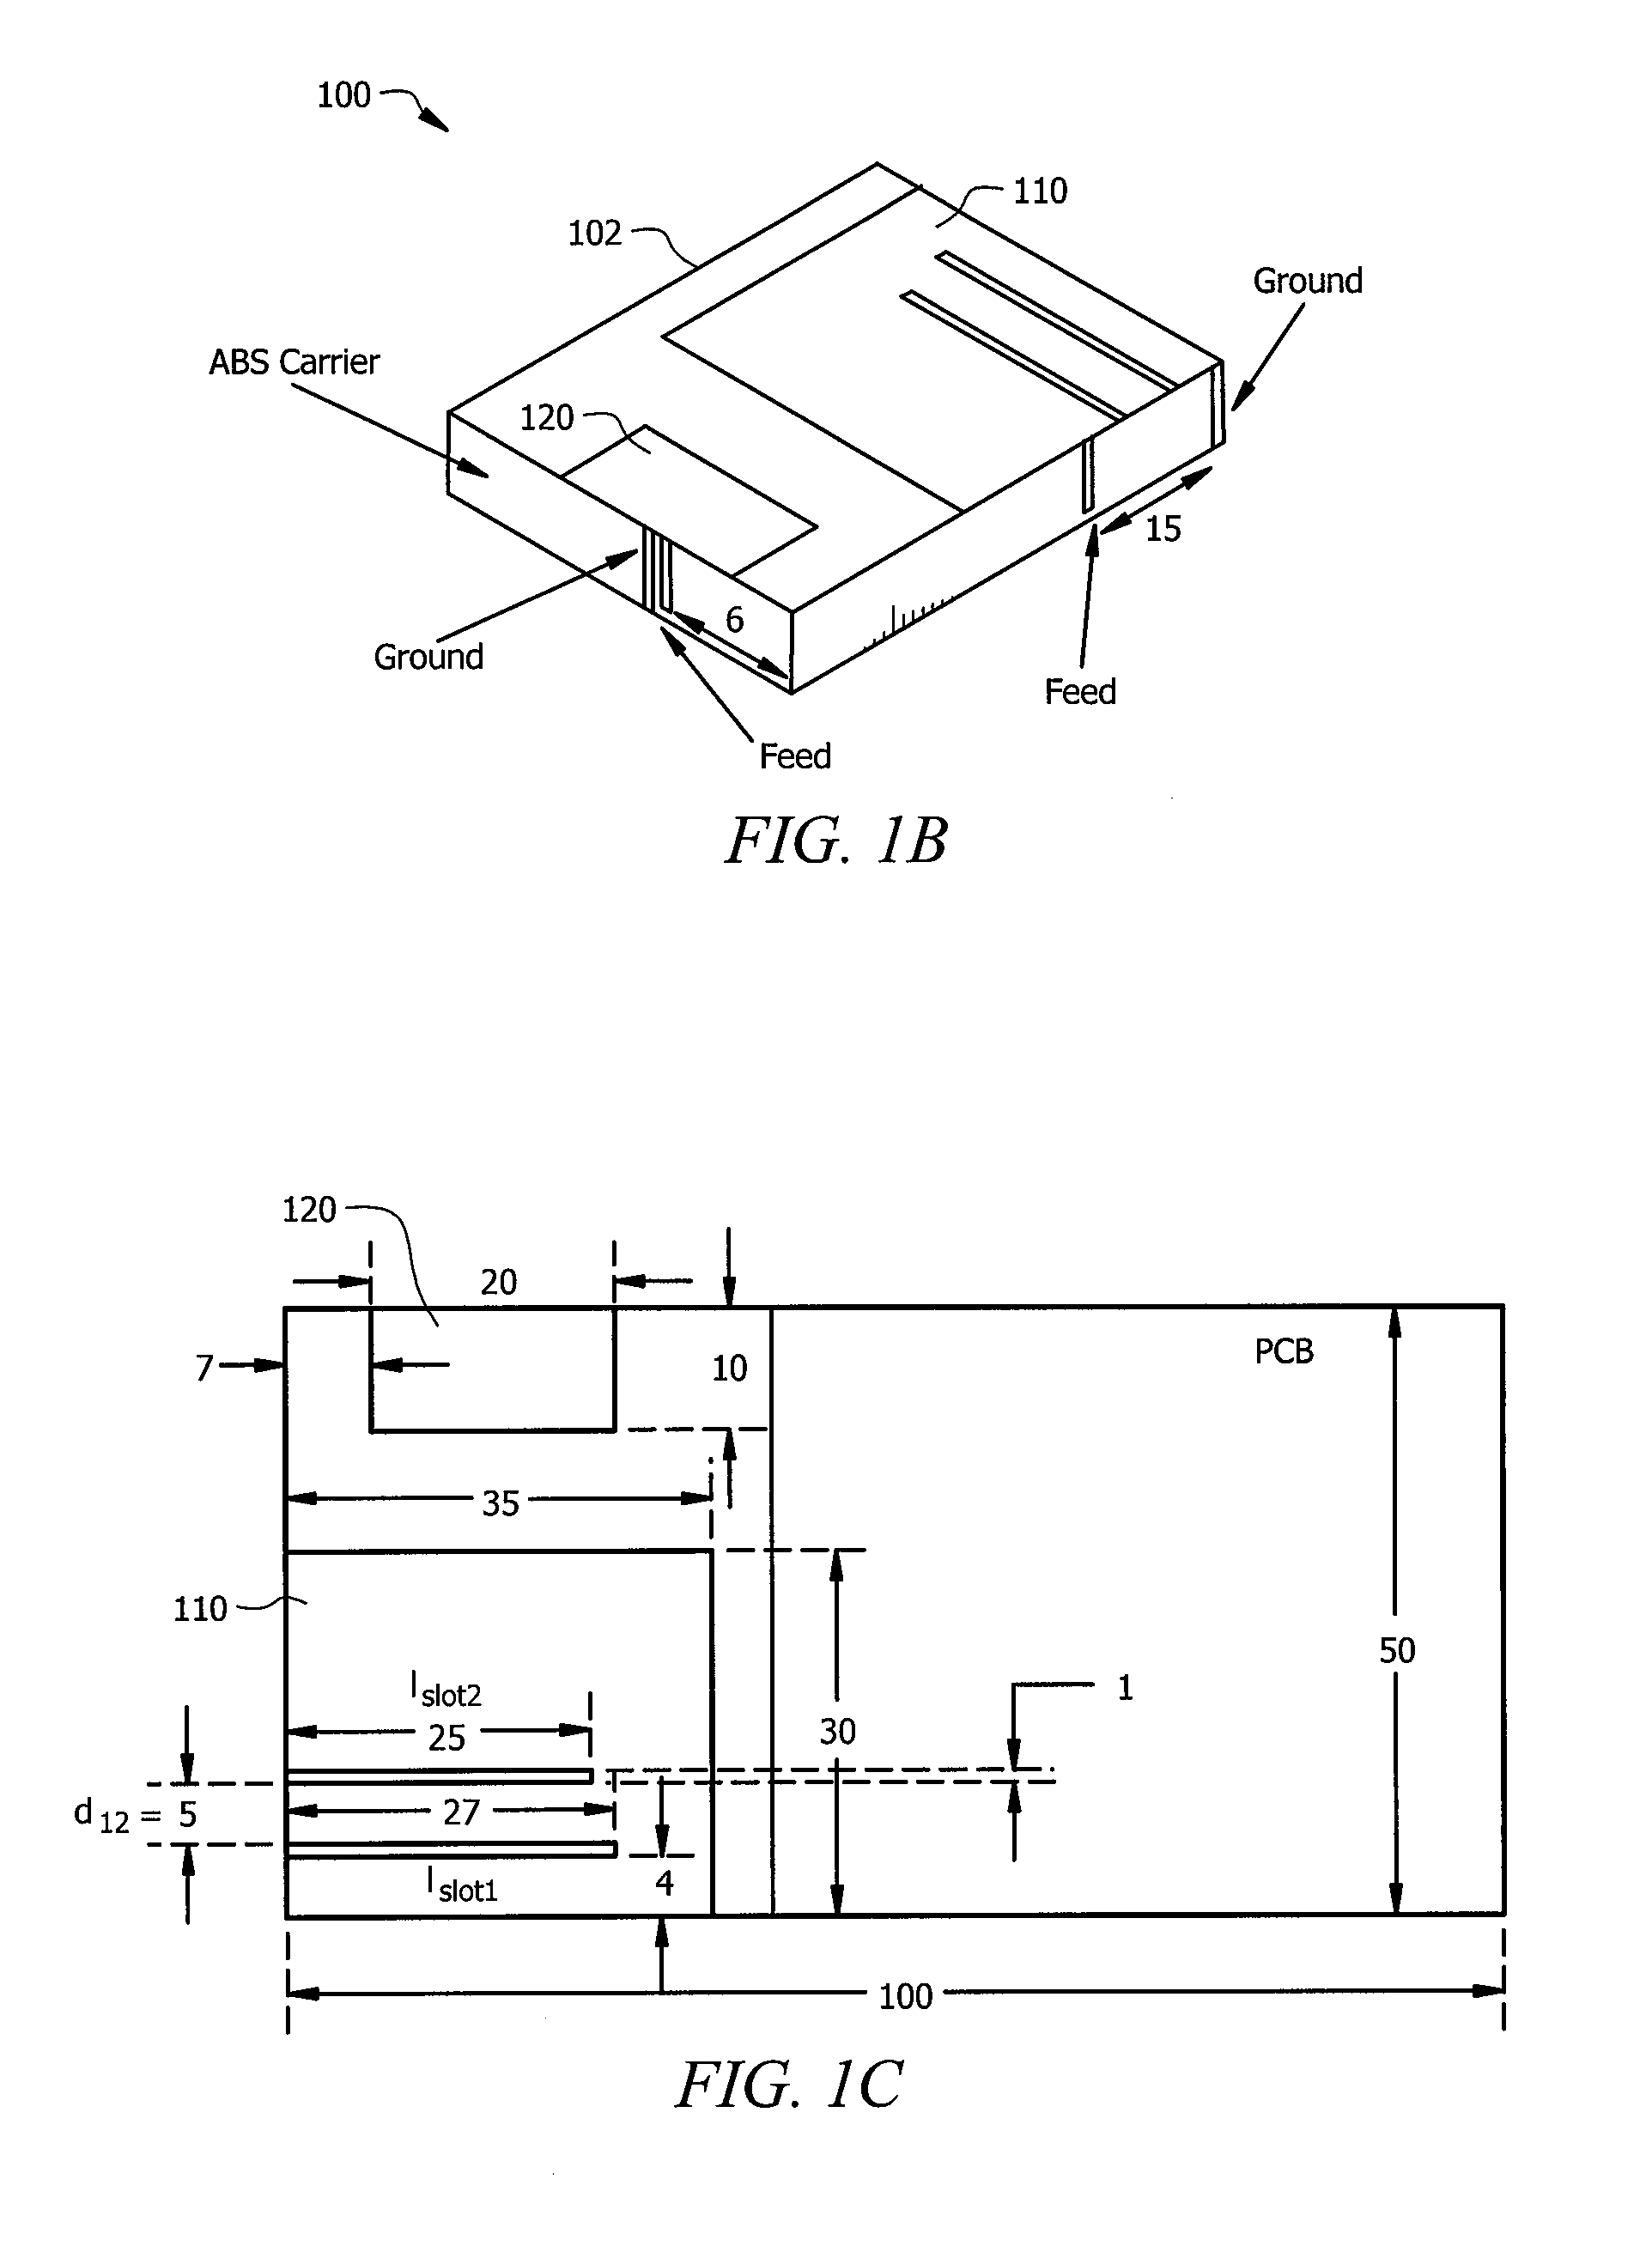 Antennas using over-coupling for wide-band operation